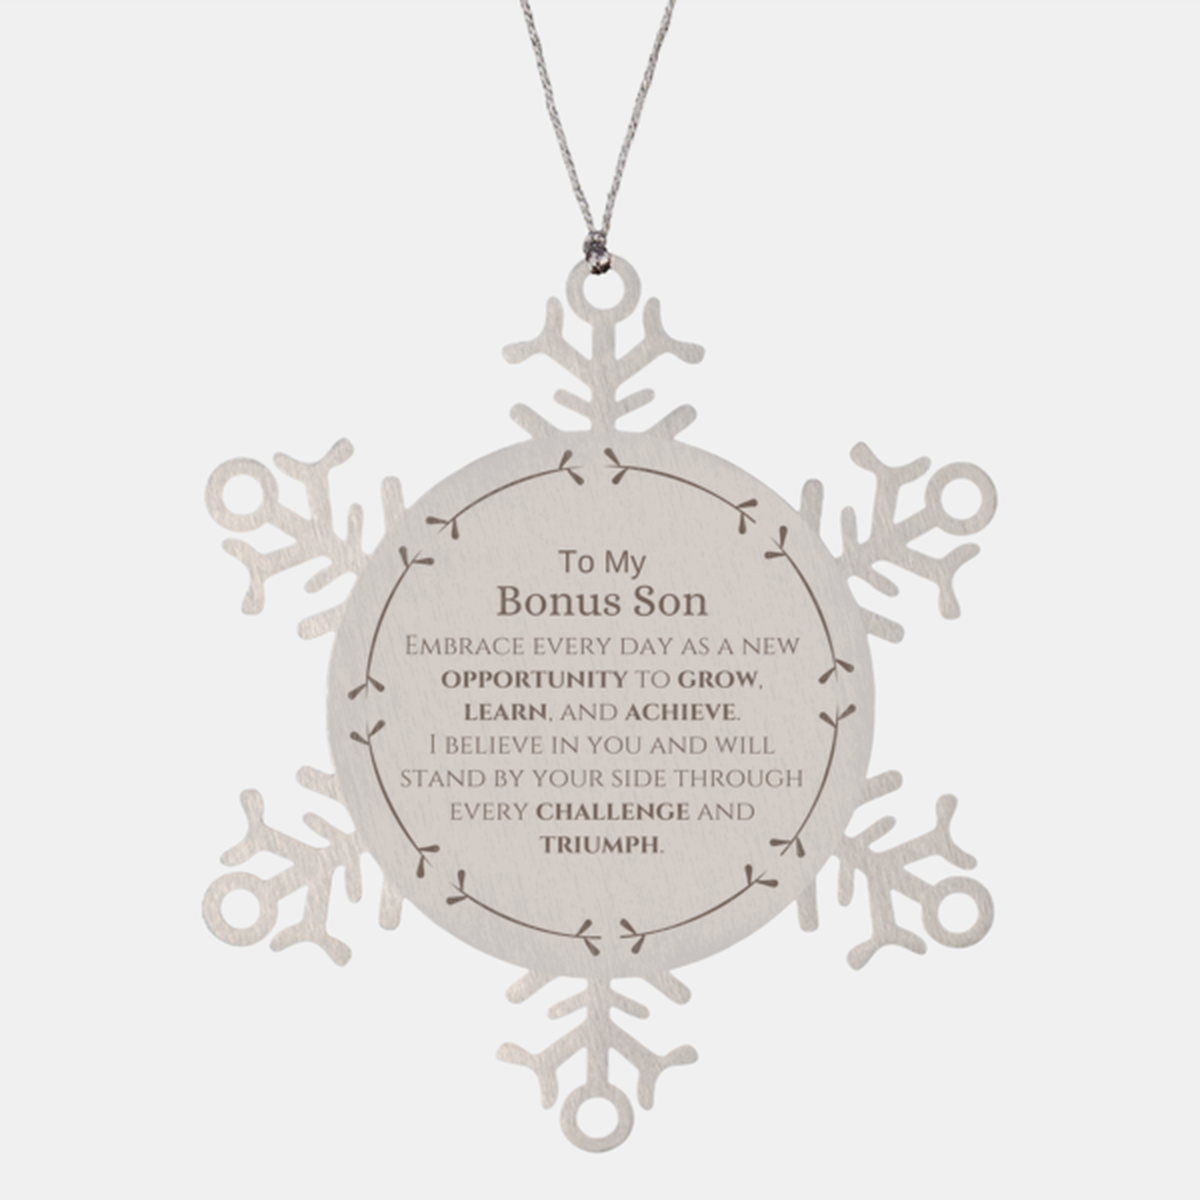 To My Bonus Son Gifts, I believe in you and will stand by your side, Inspirational Snowflake Ornament For Bonus Son, Birthday Christmas Motivational Bonus Son Gifts